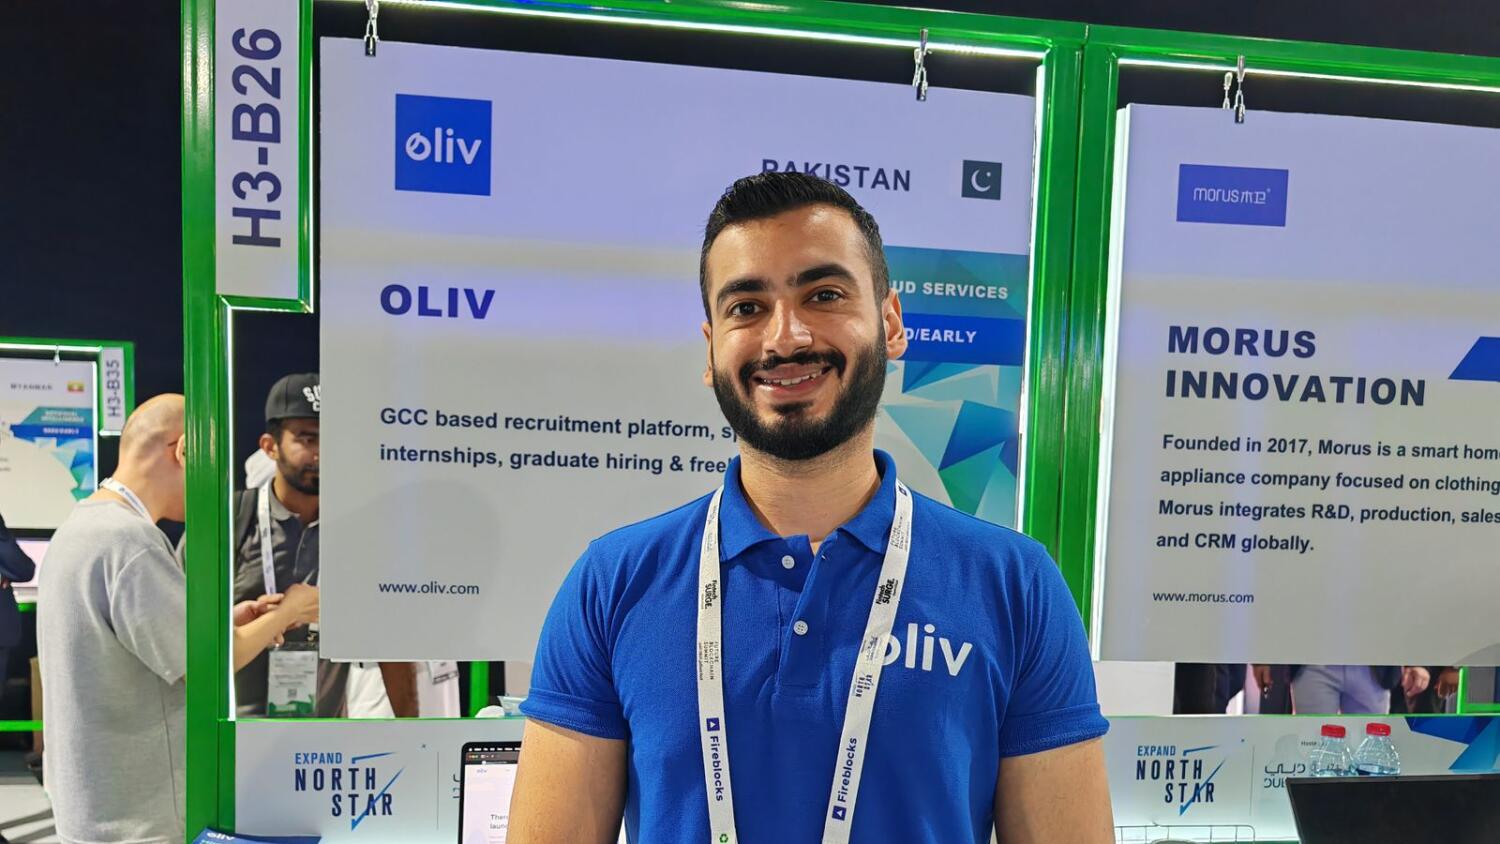 Adeel Abid in front of Oliv stall at the Expand North Star exhibition. — Supplied photo